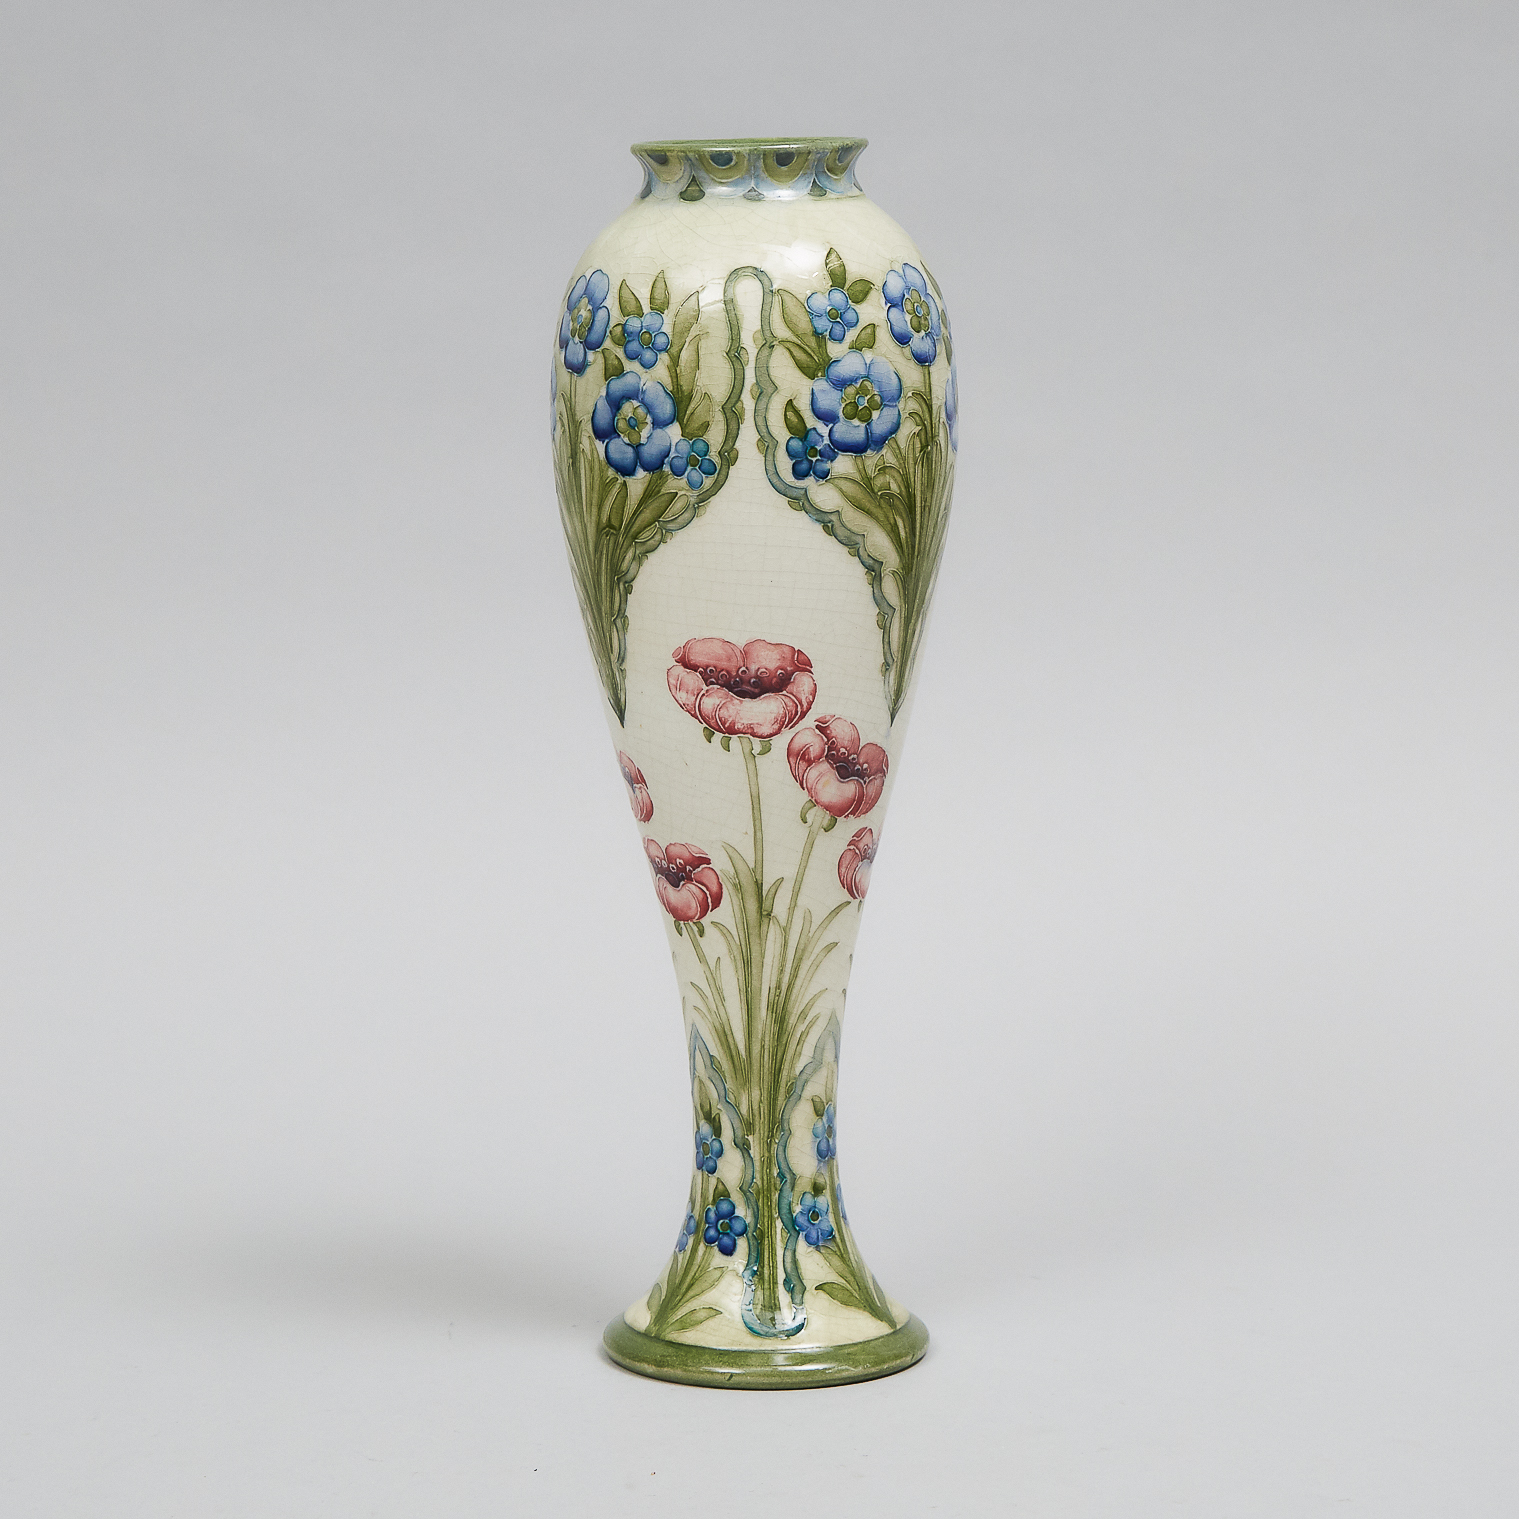 Macintyre Moorcroft Poppy and Forget-me-not Vase, dated 1913